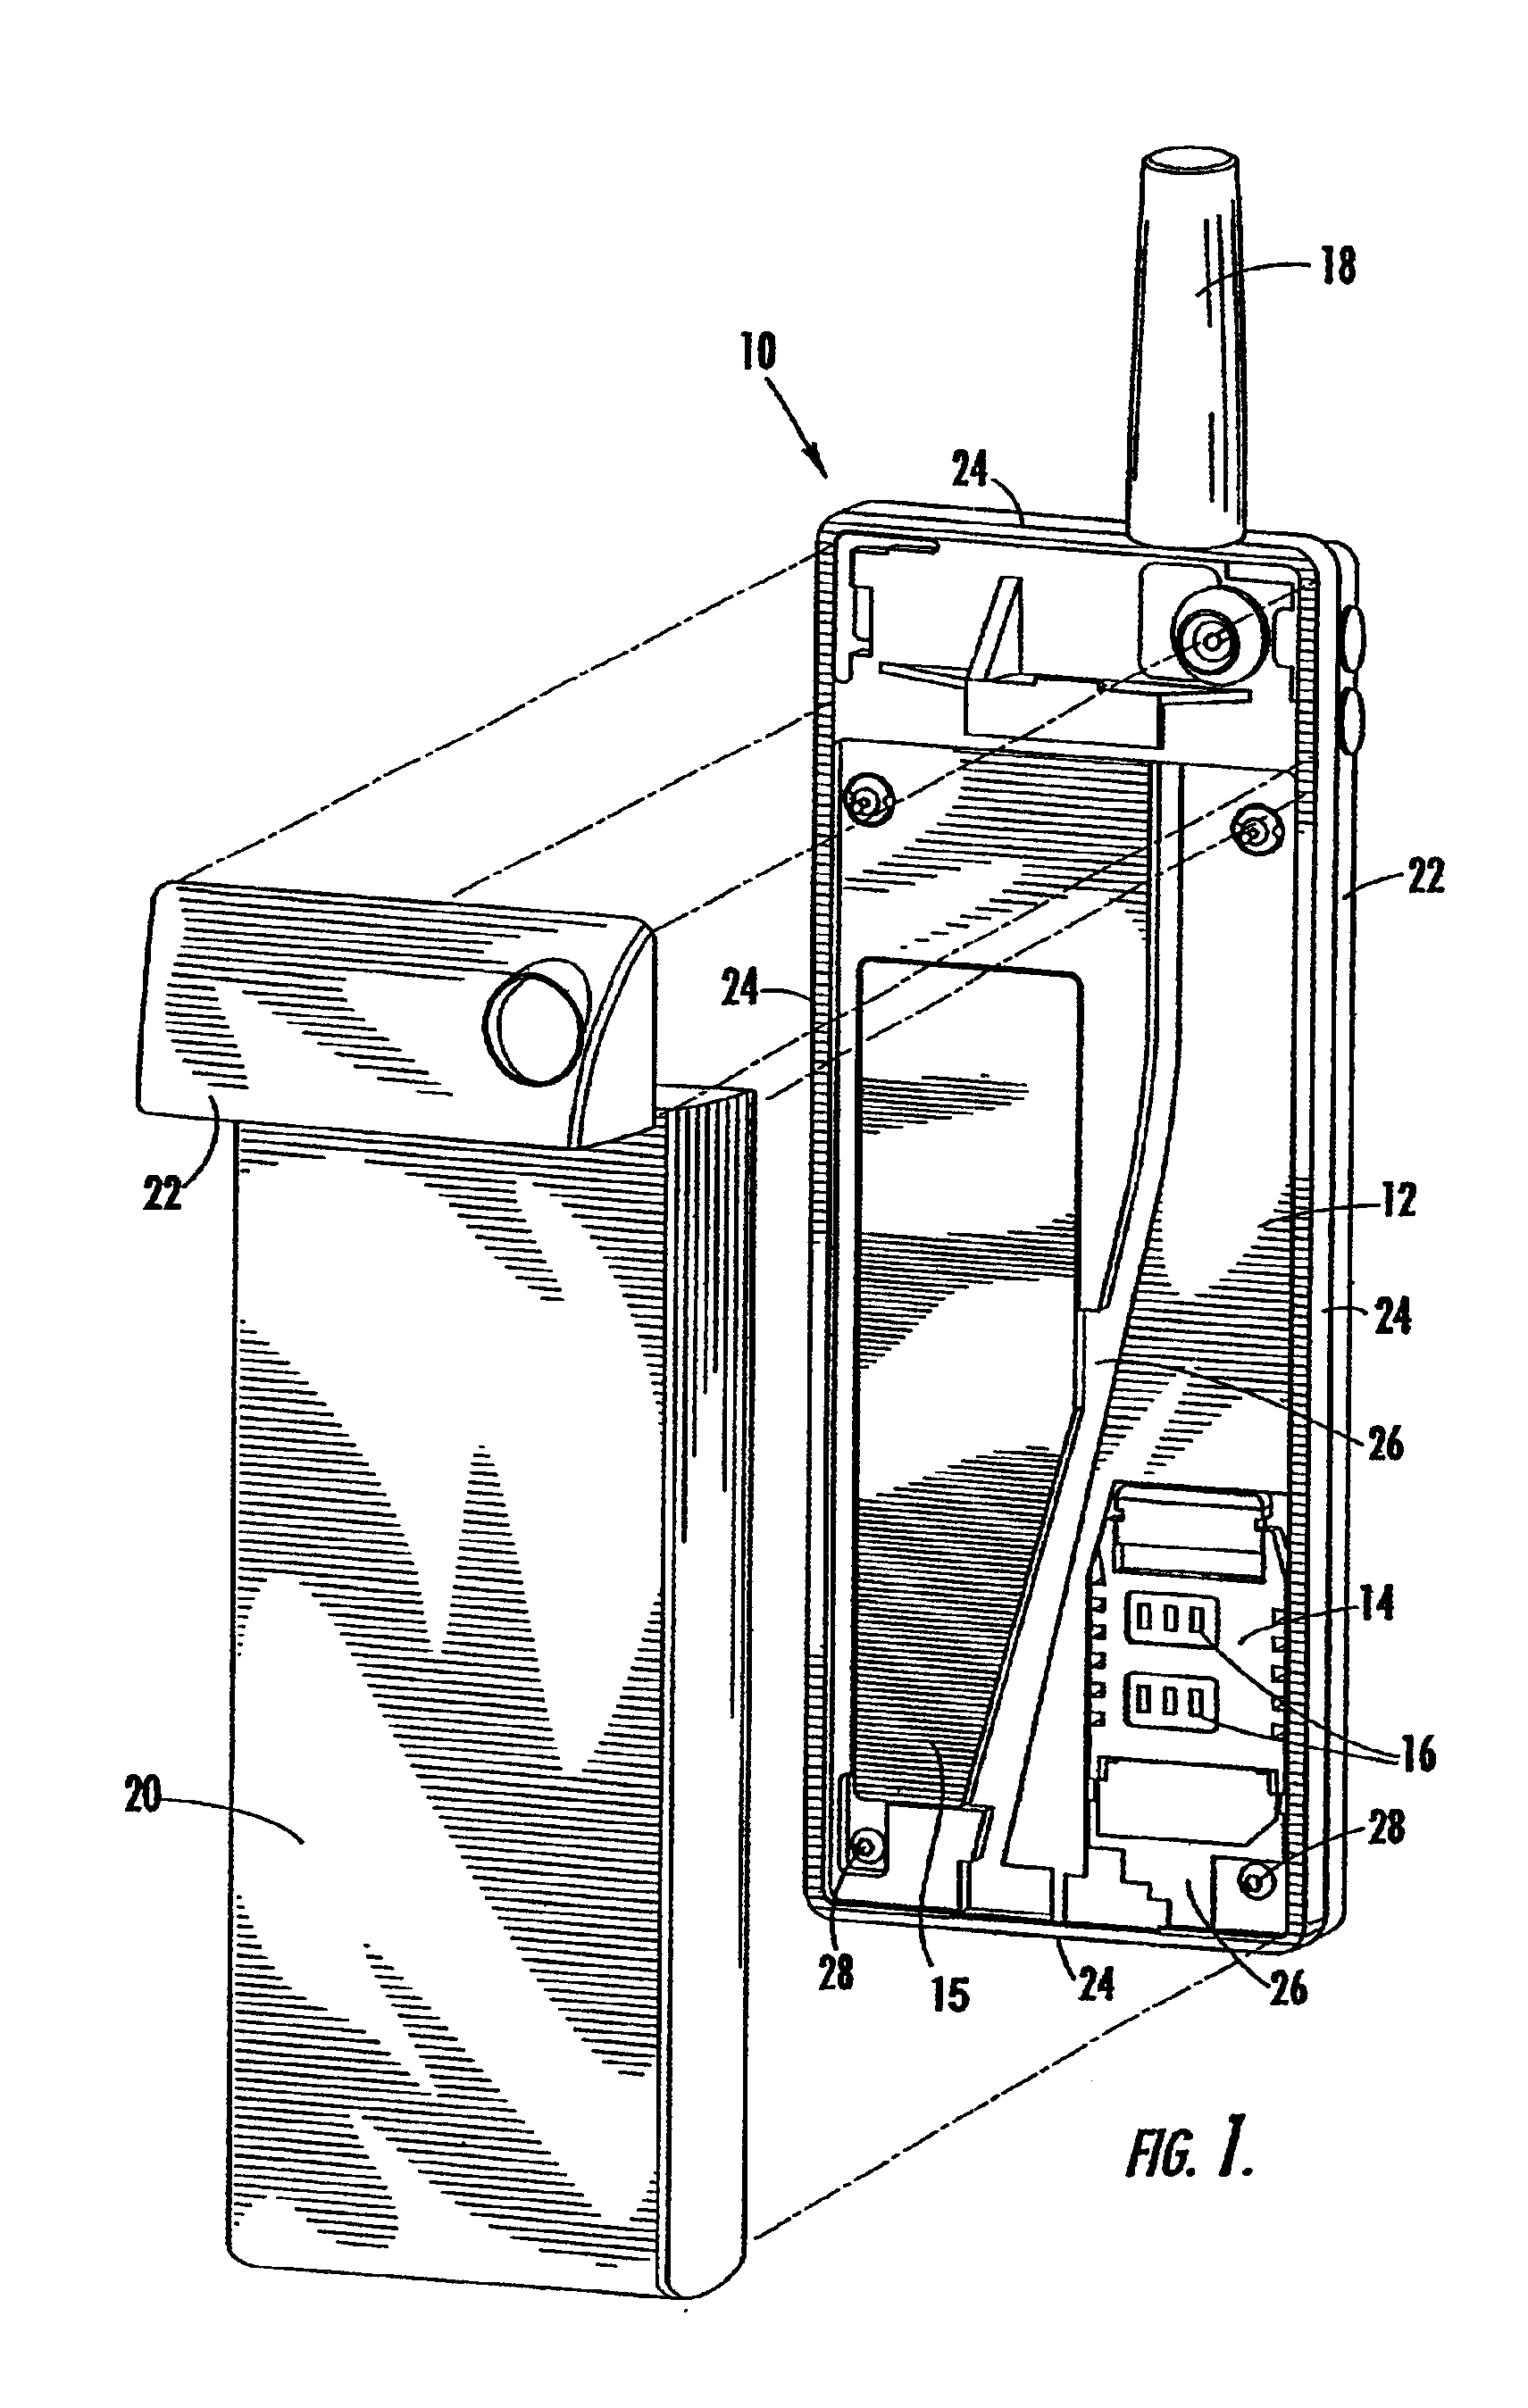 Method of manufacturing a structural frame